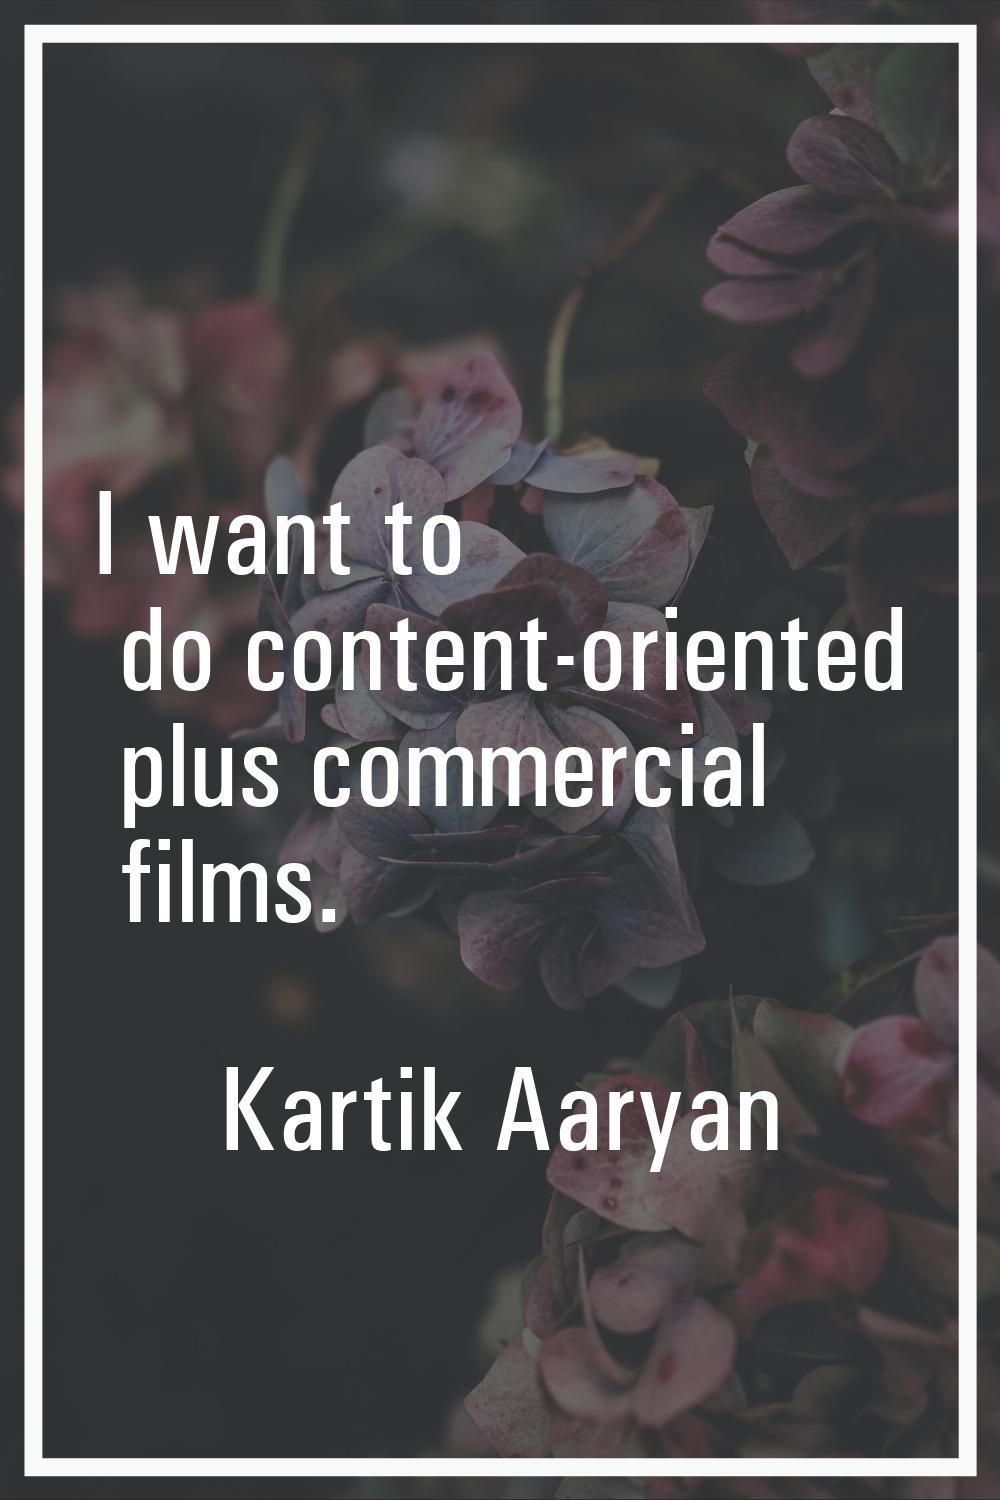 I want to do content-oriented plus commercial films.